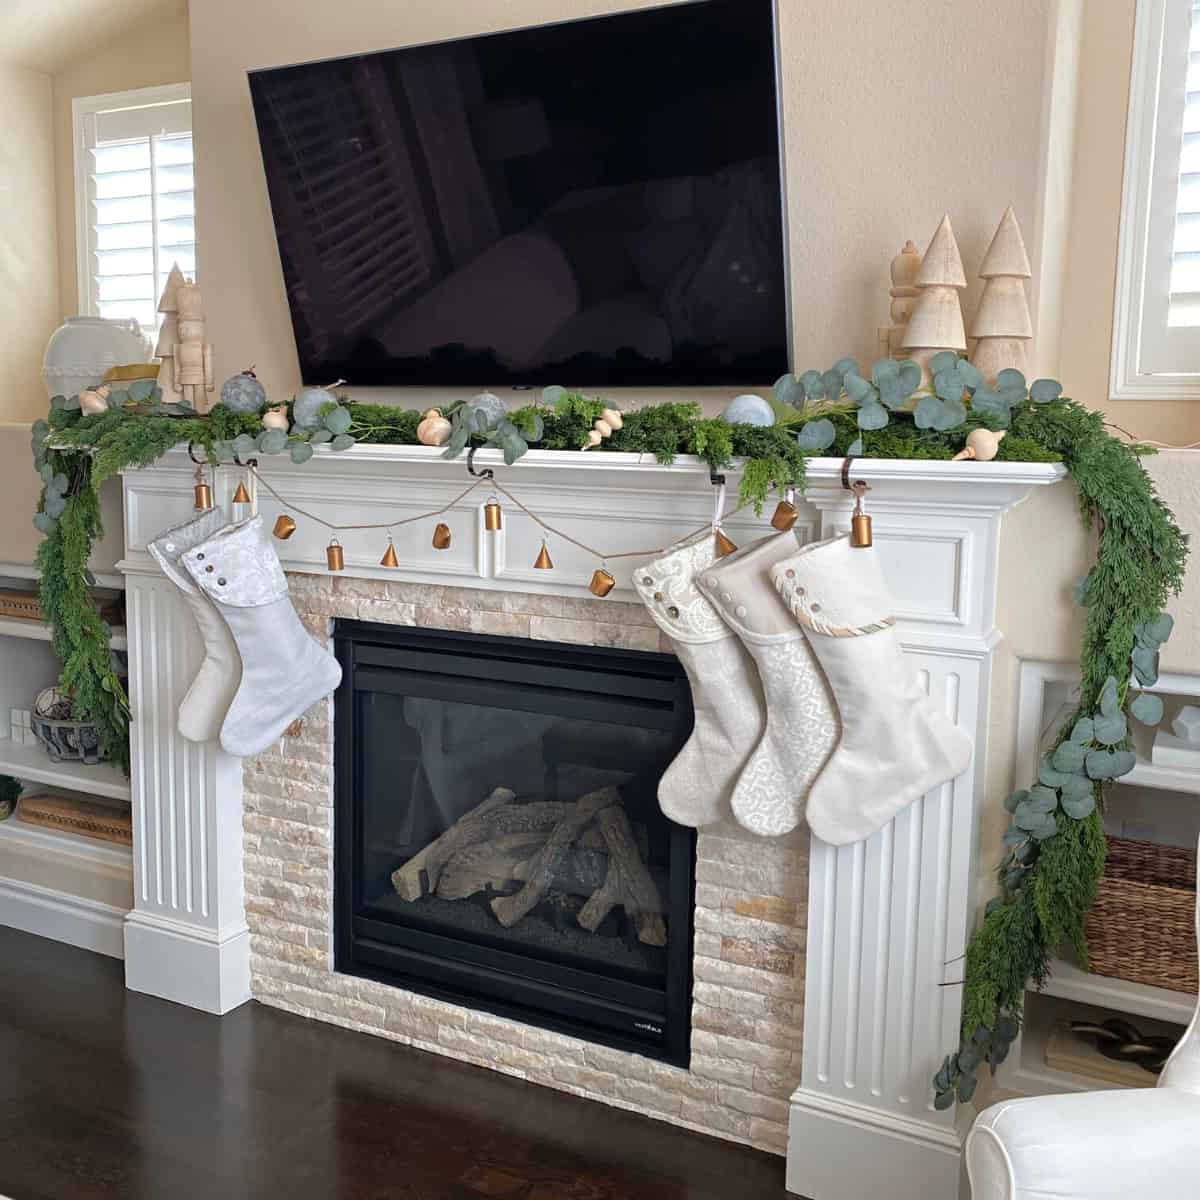 Fireplace mantel decorated for Christmas with greenery garland, stockings and ornaments